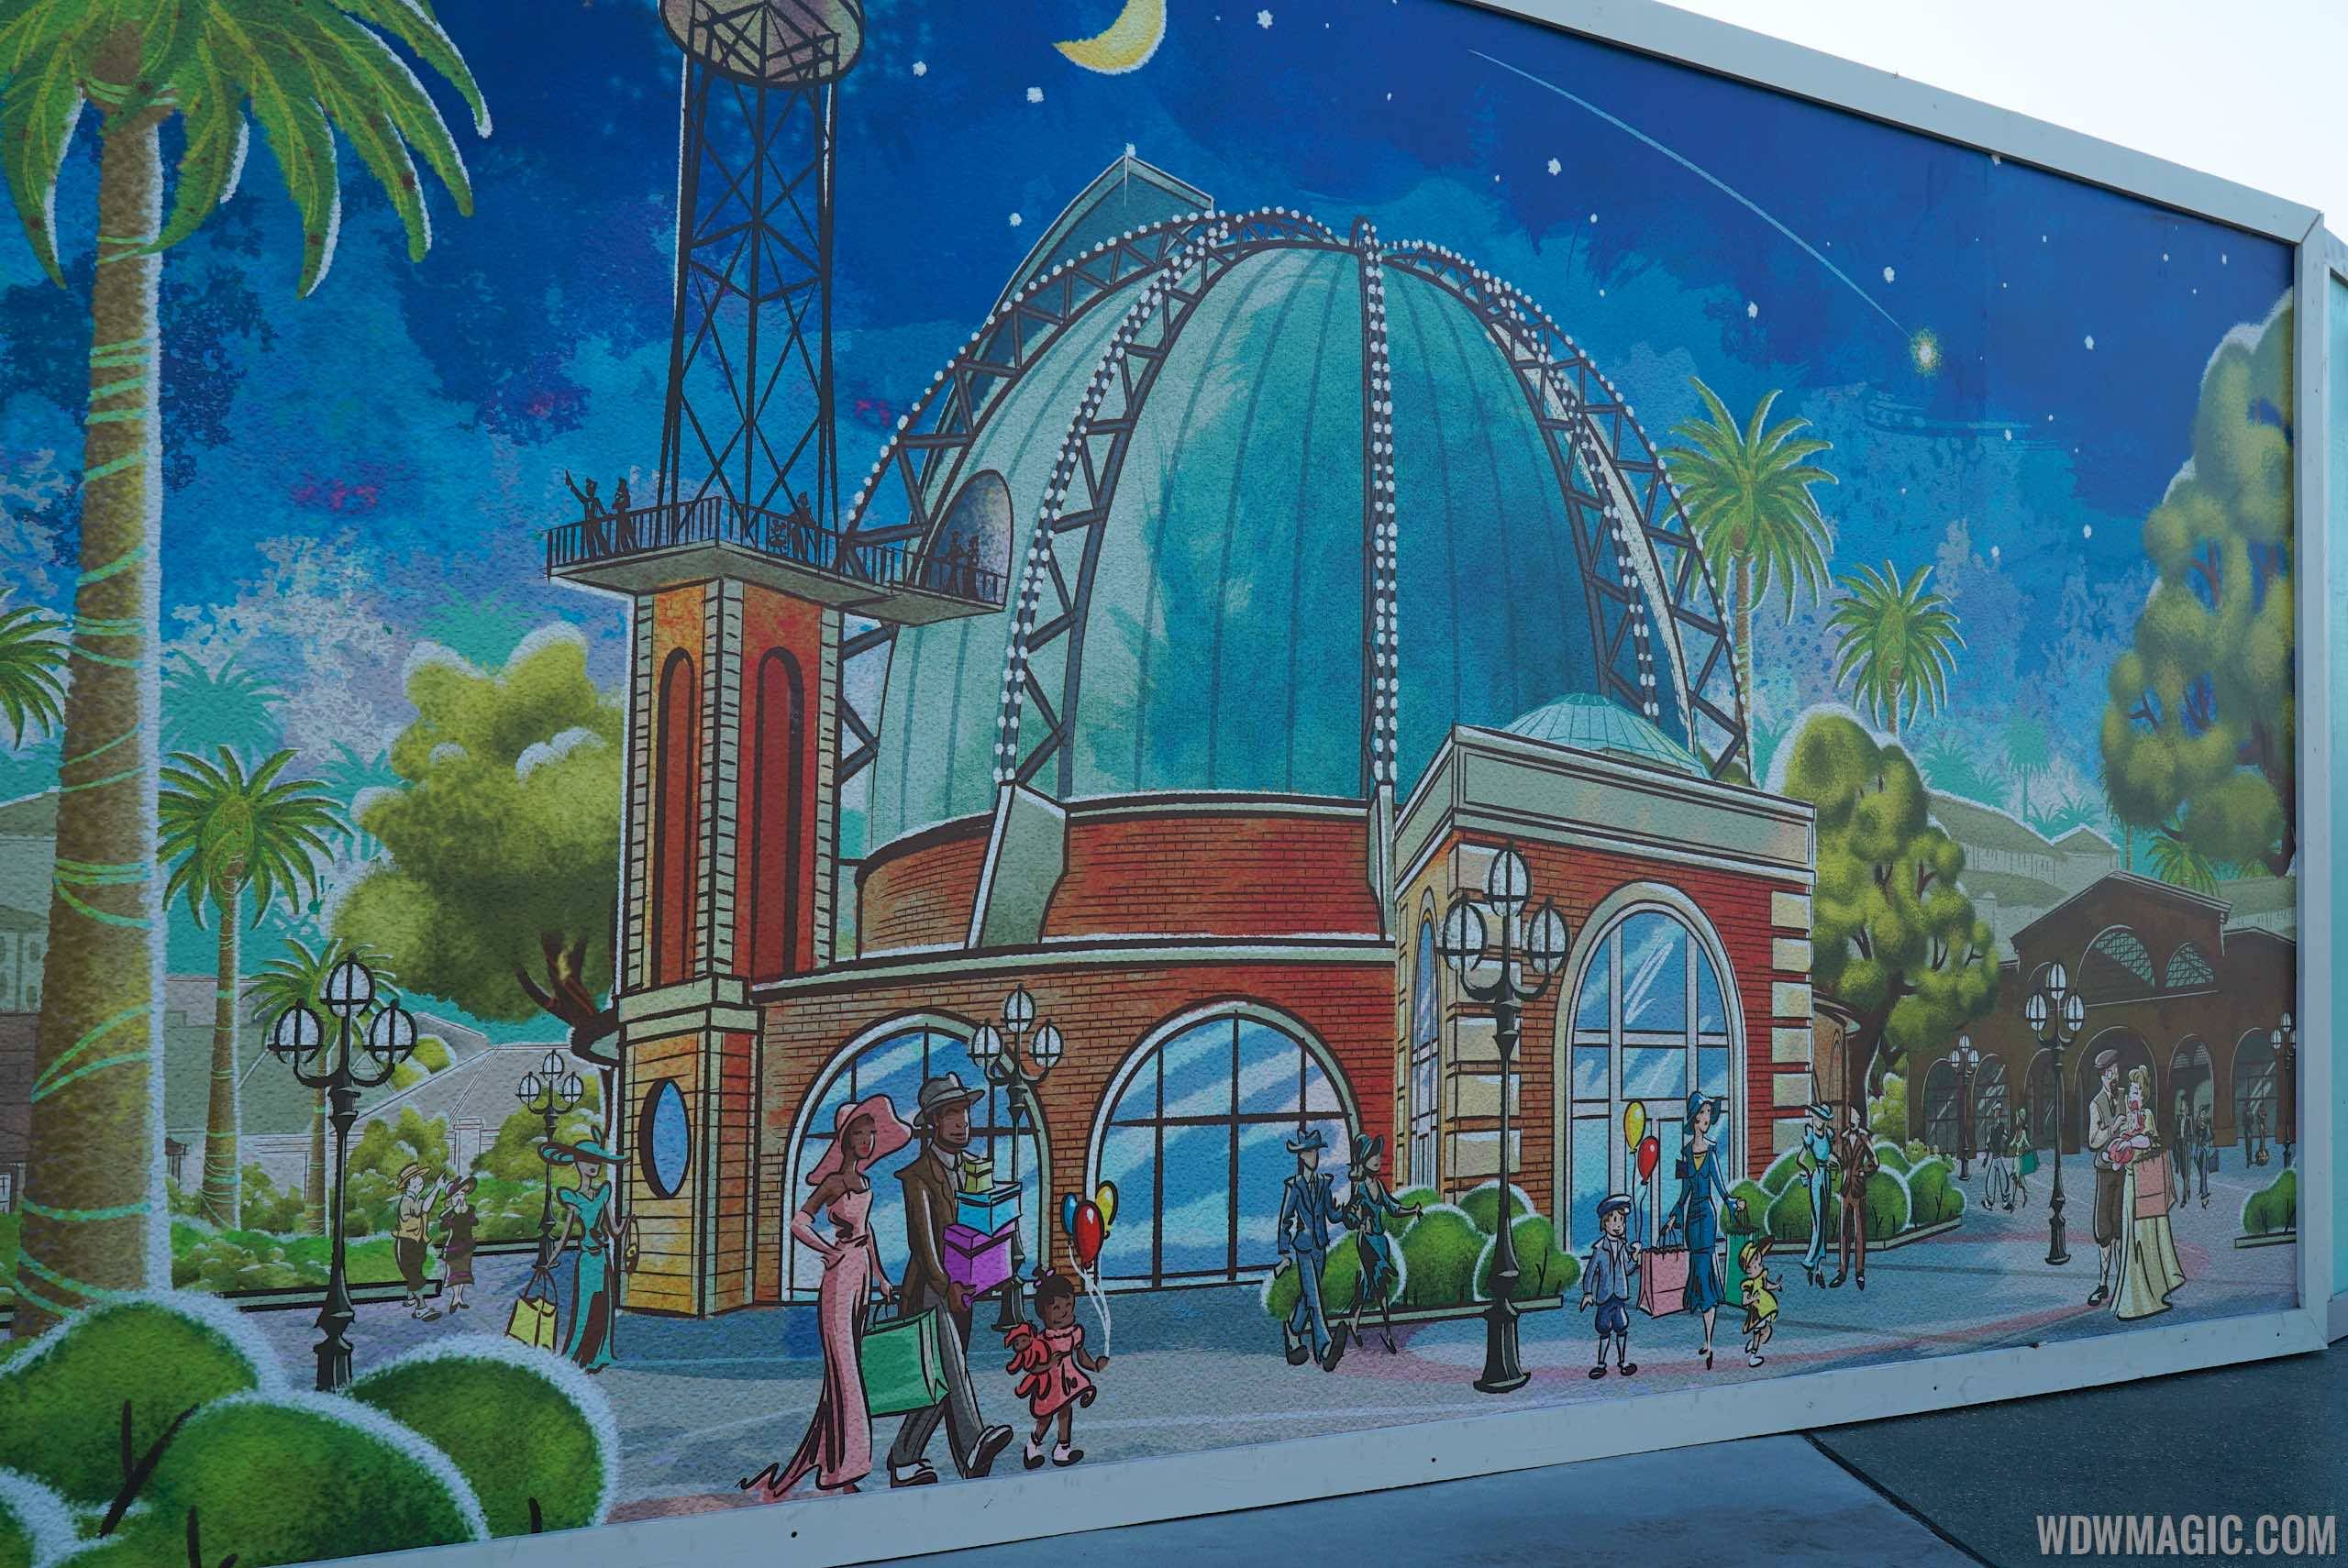 PHOTOS - New Planet Hollywood concept art shows the Stargazers patio and new interior design